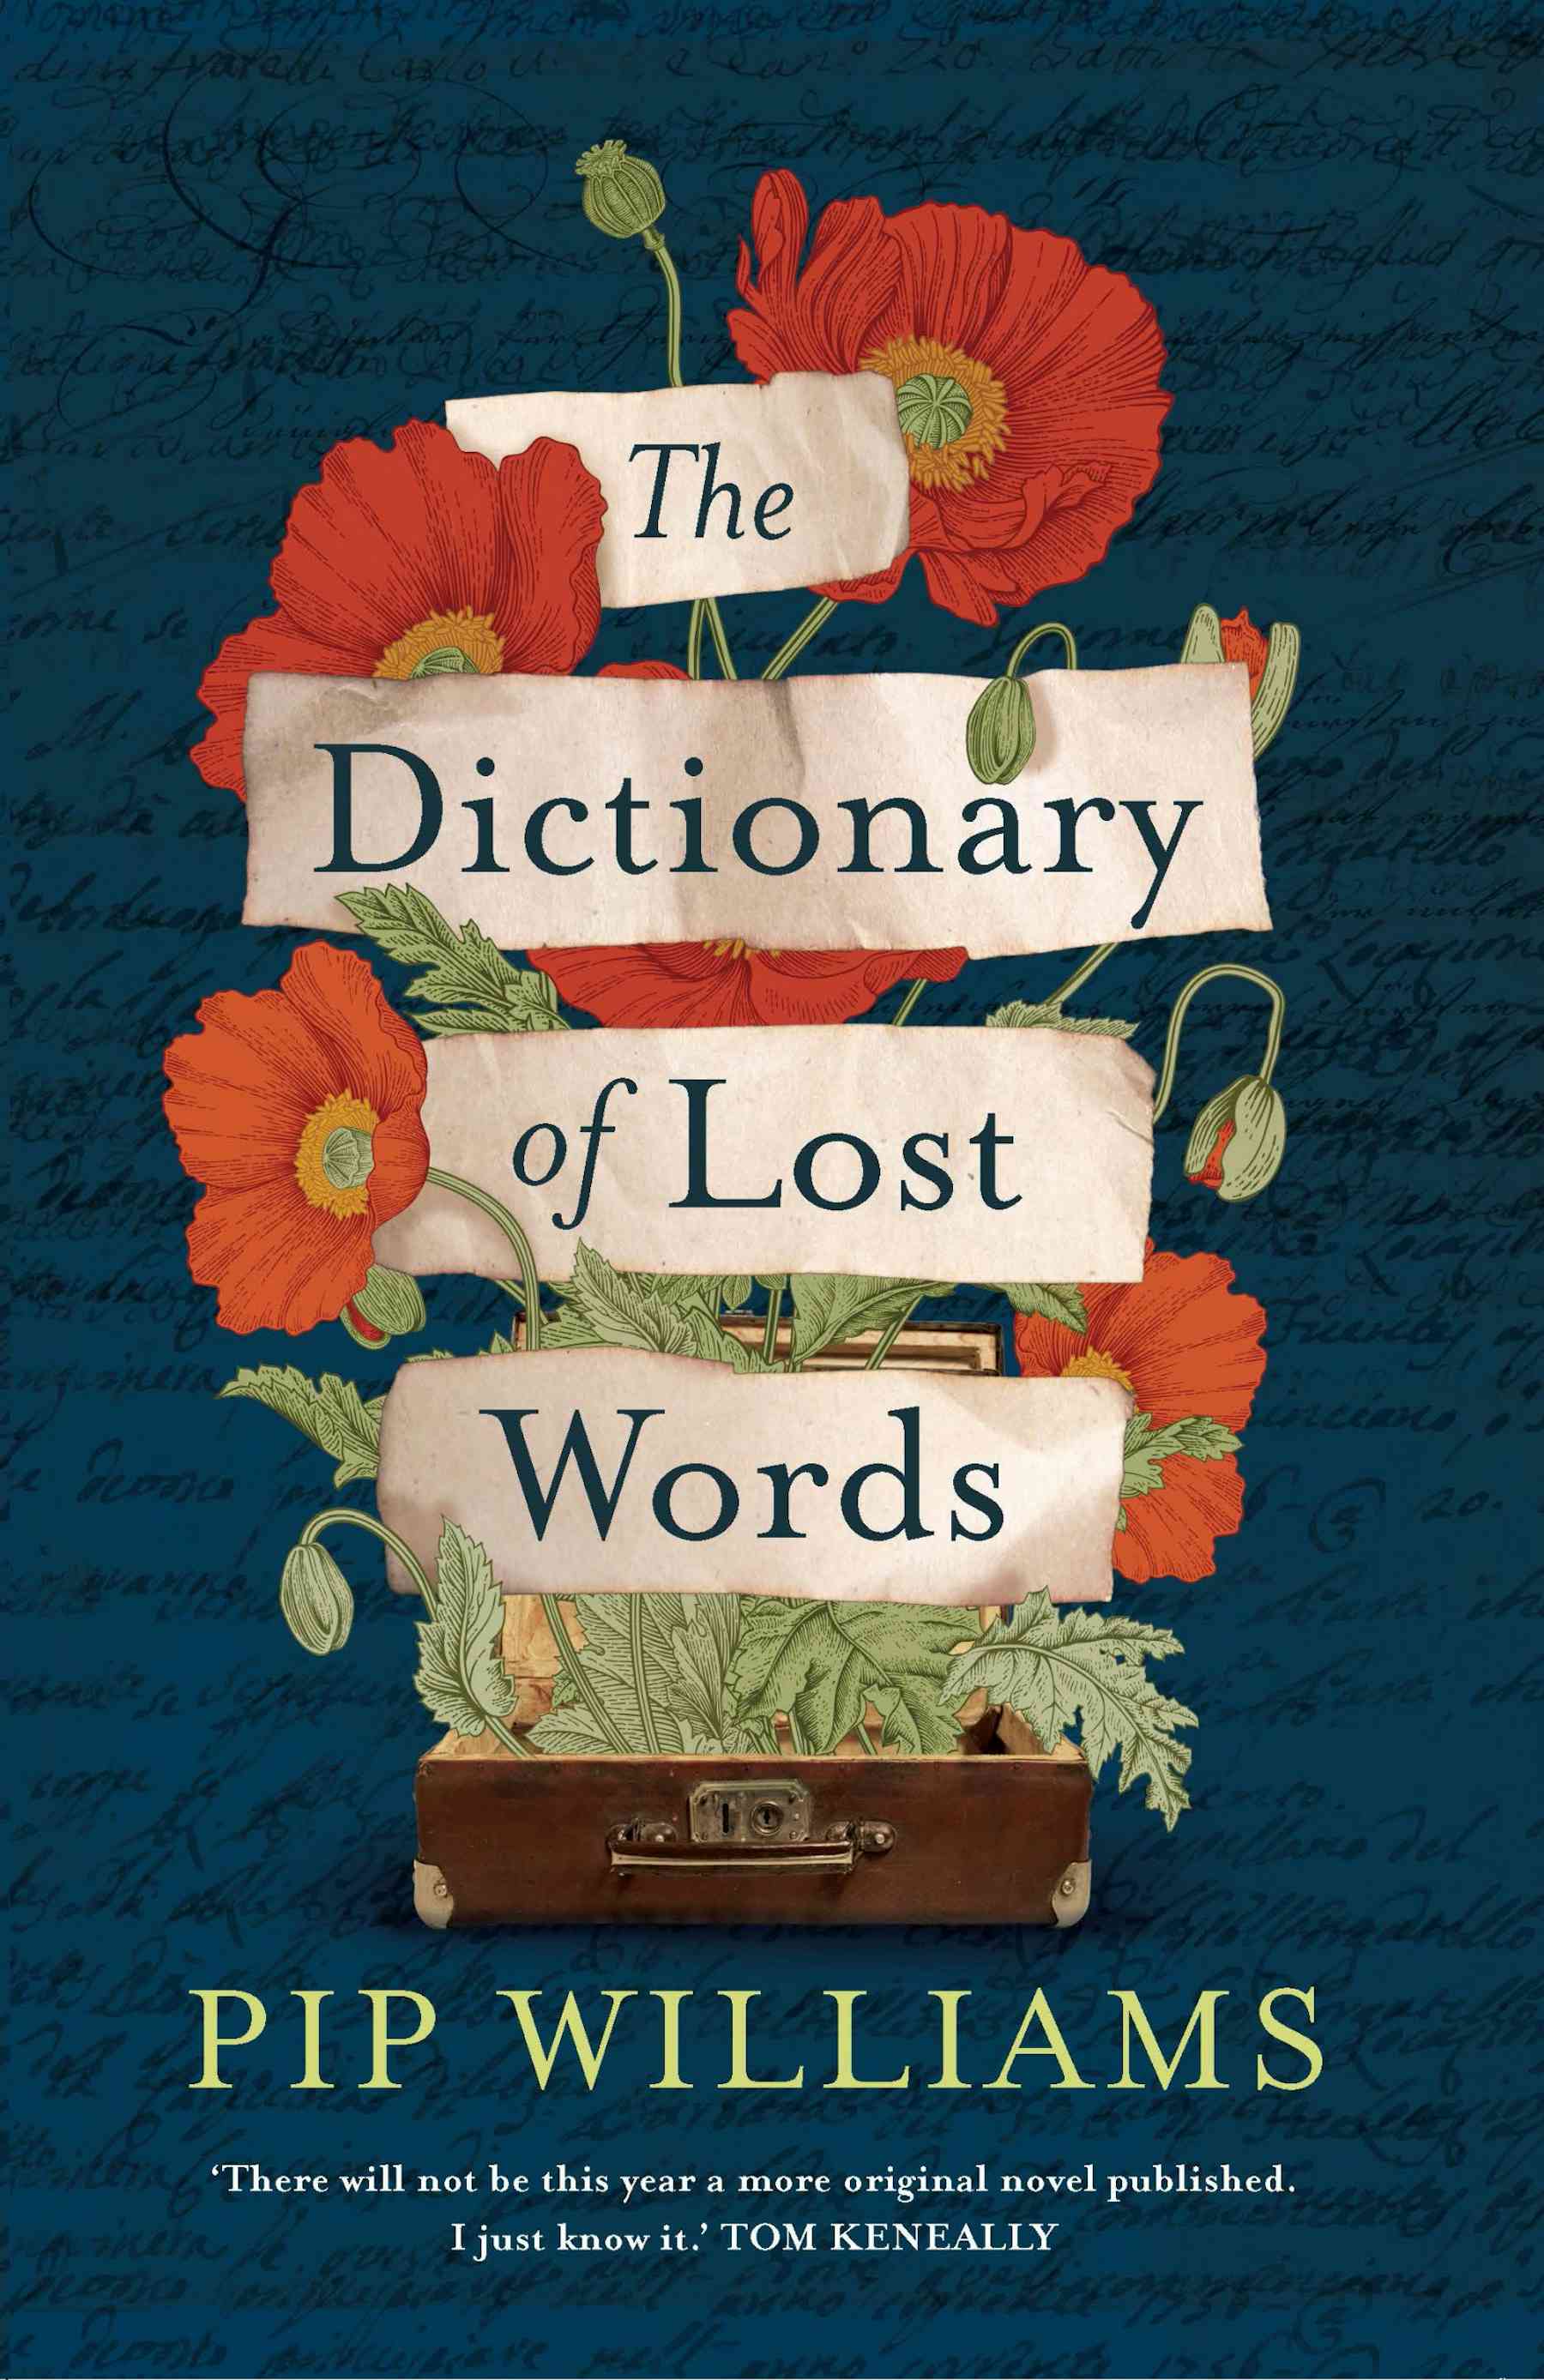 book review for the dictionary of lost words